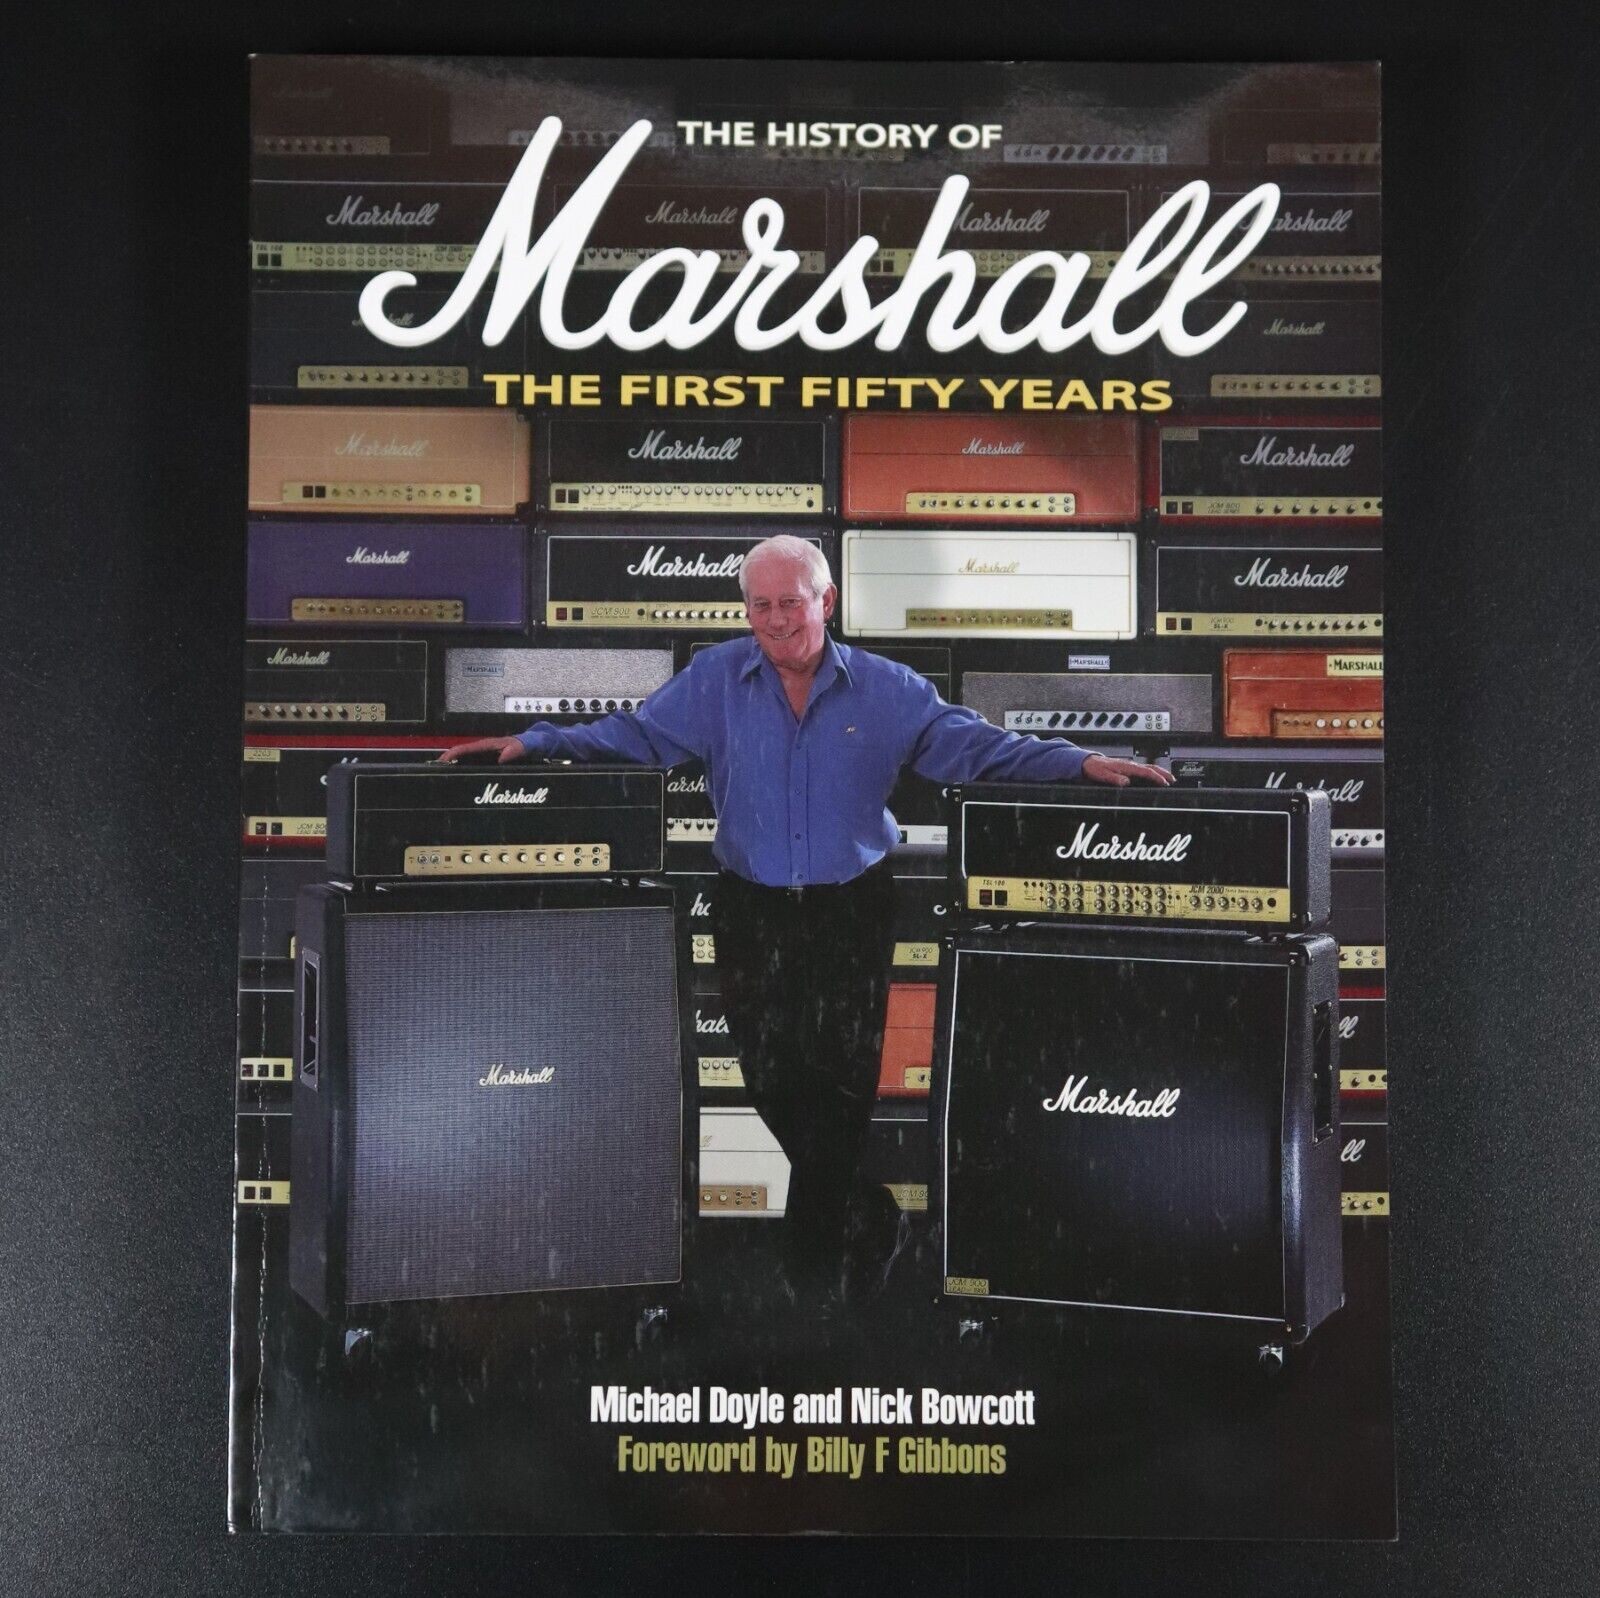 2013 The History Of Marshall - First Fifty Years Marshall Amplifiers Guitar Book